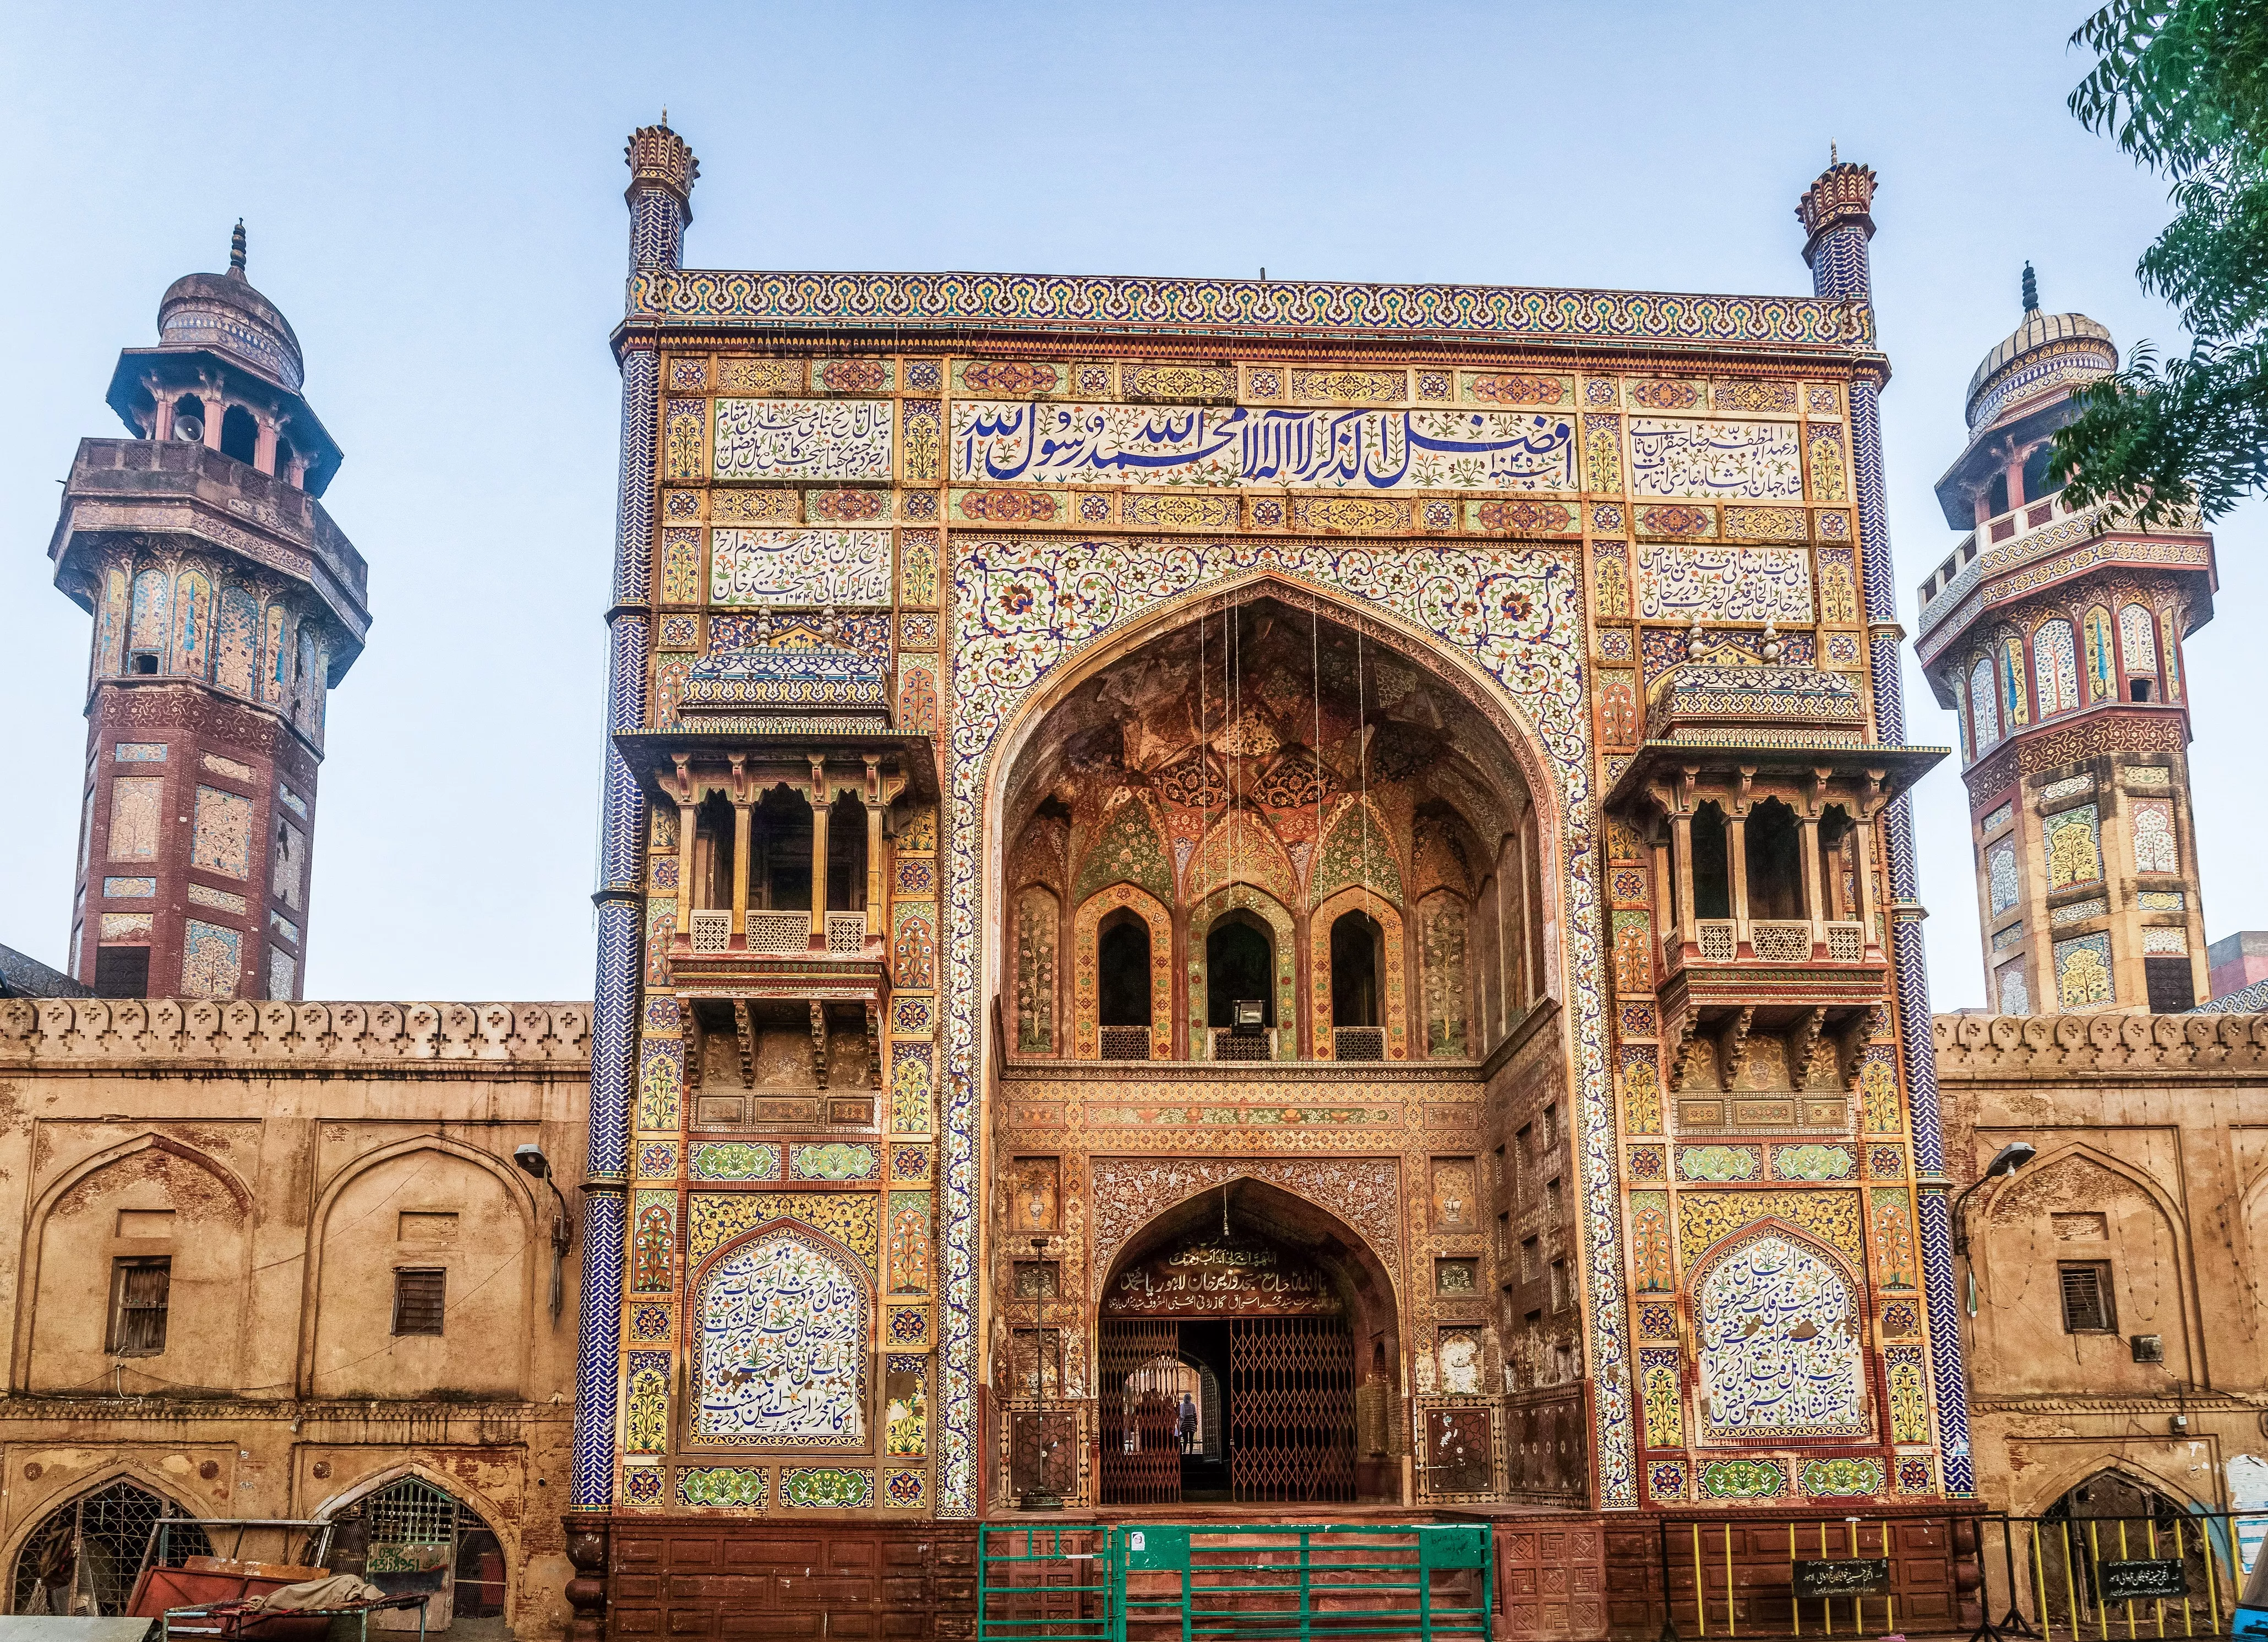 Wazir Khan Mosque in Pakistan, South Asia | Architecture - Rated 4.1